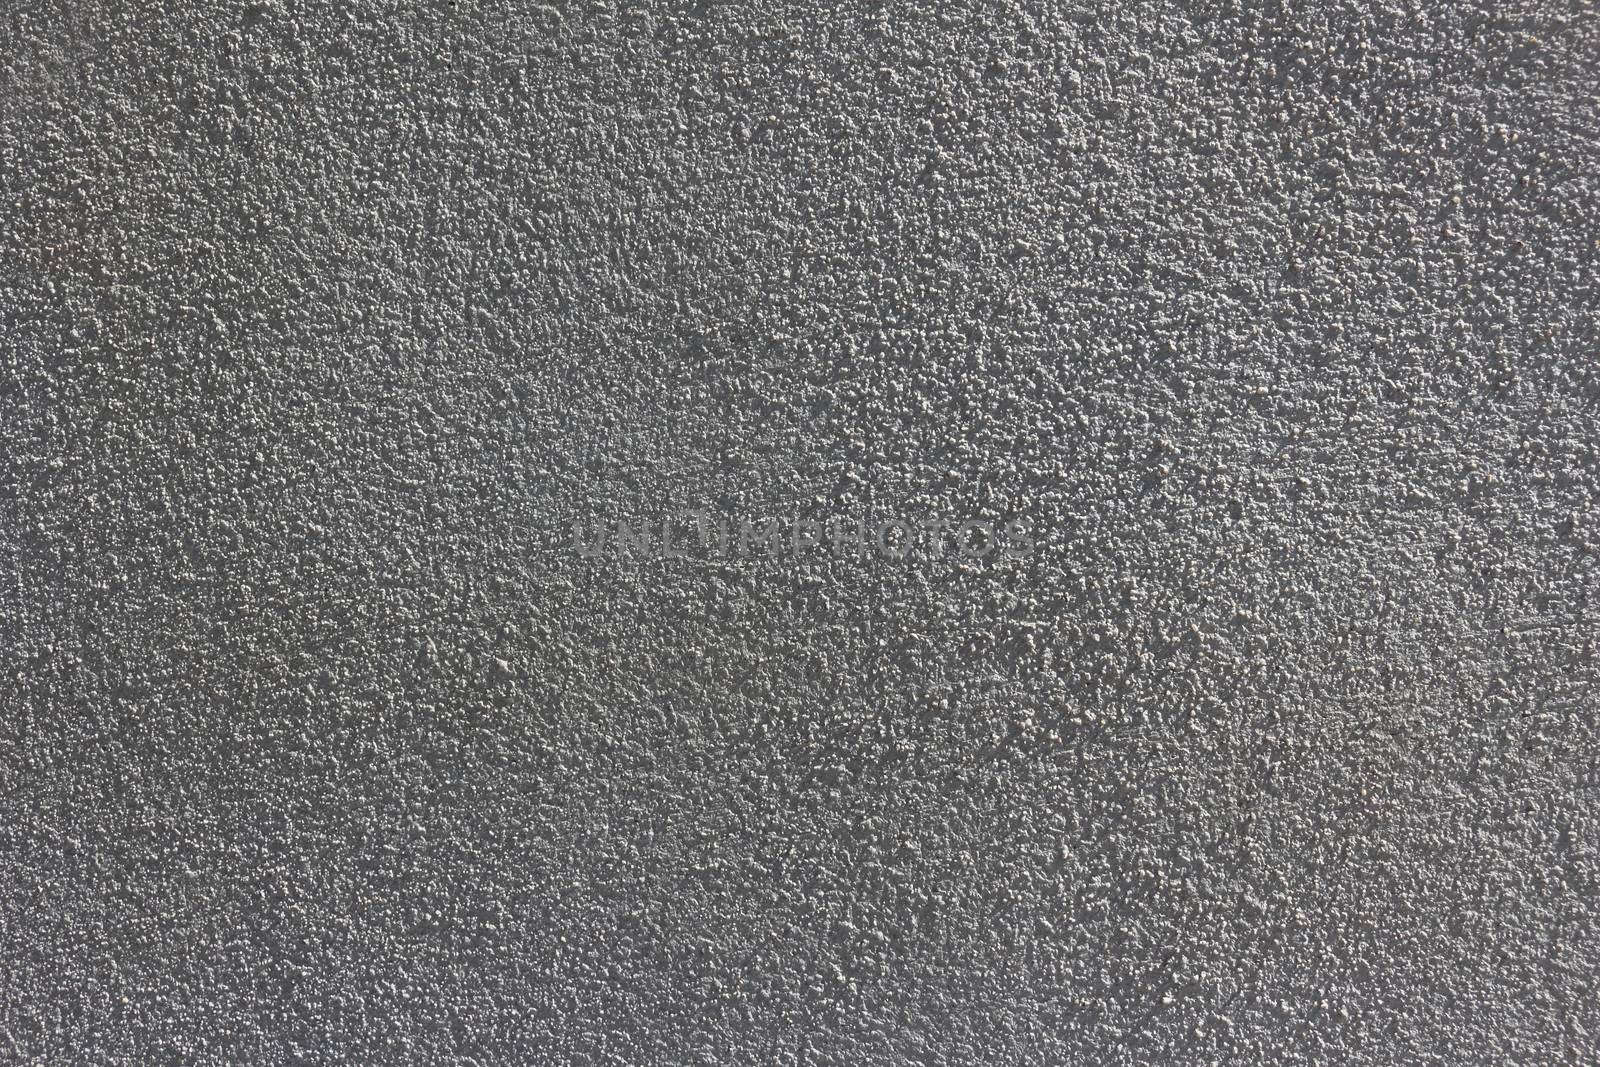 surface of cement wall.